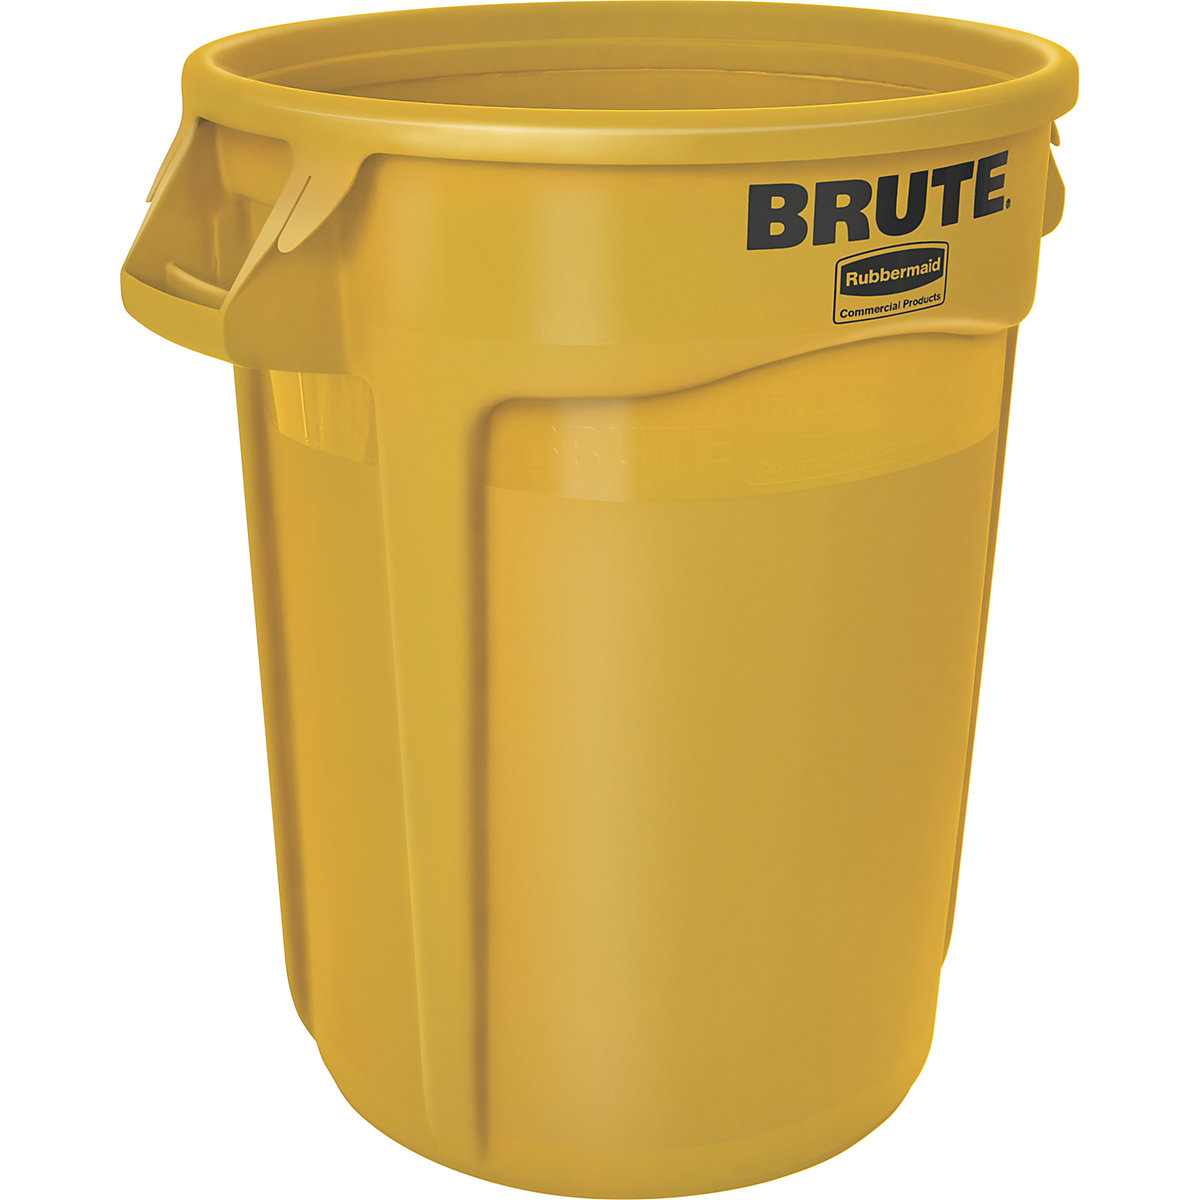 BRUTE® universal container, round – Rubbermaid, capacity 121 l, yellow-15